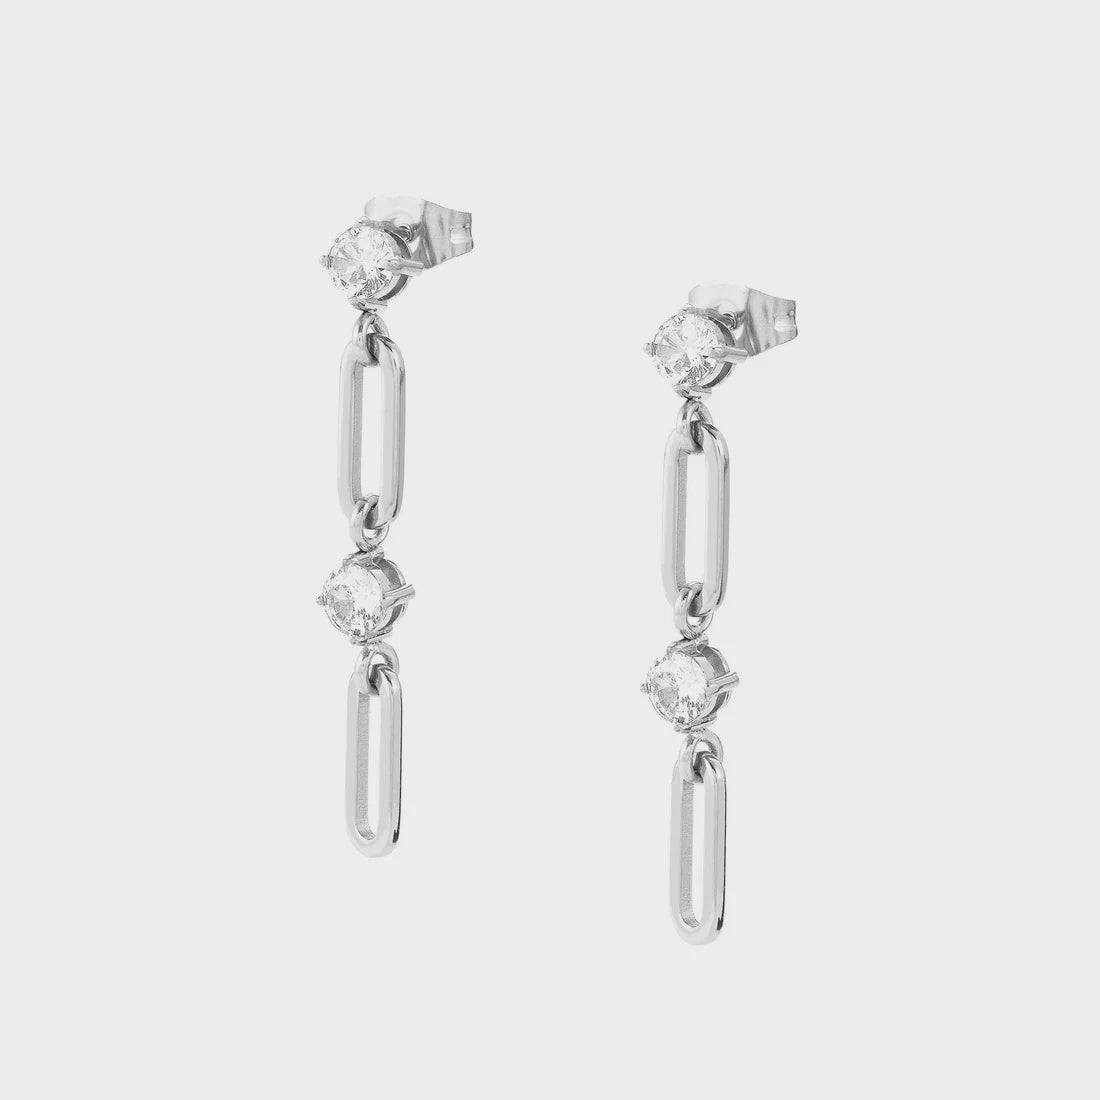 Nomination ChainsOfStyle Silver Earrings